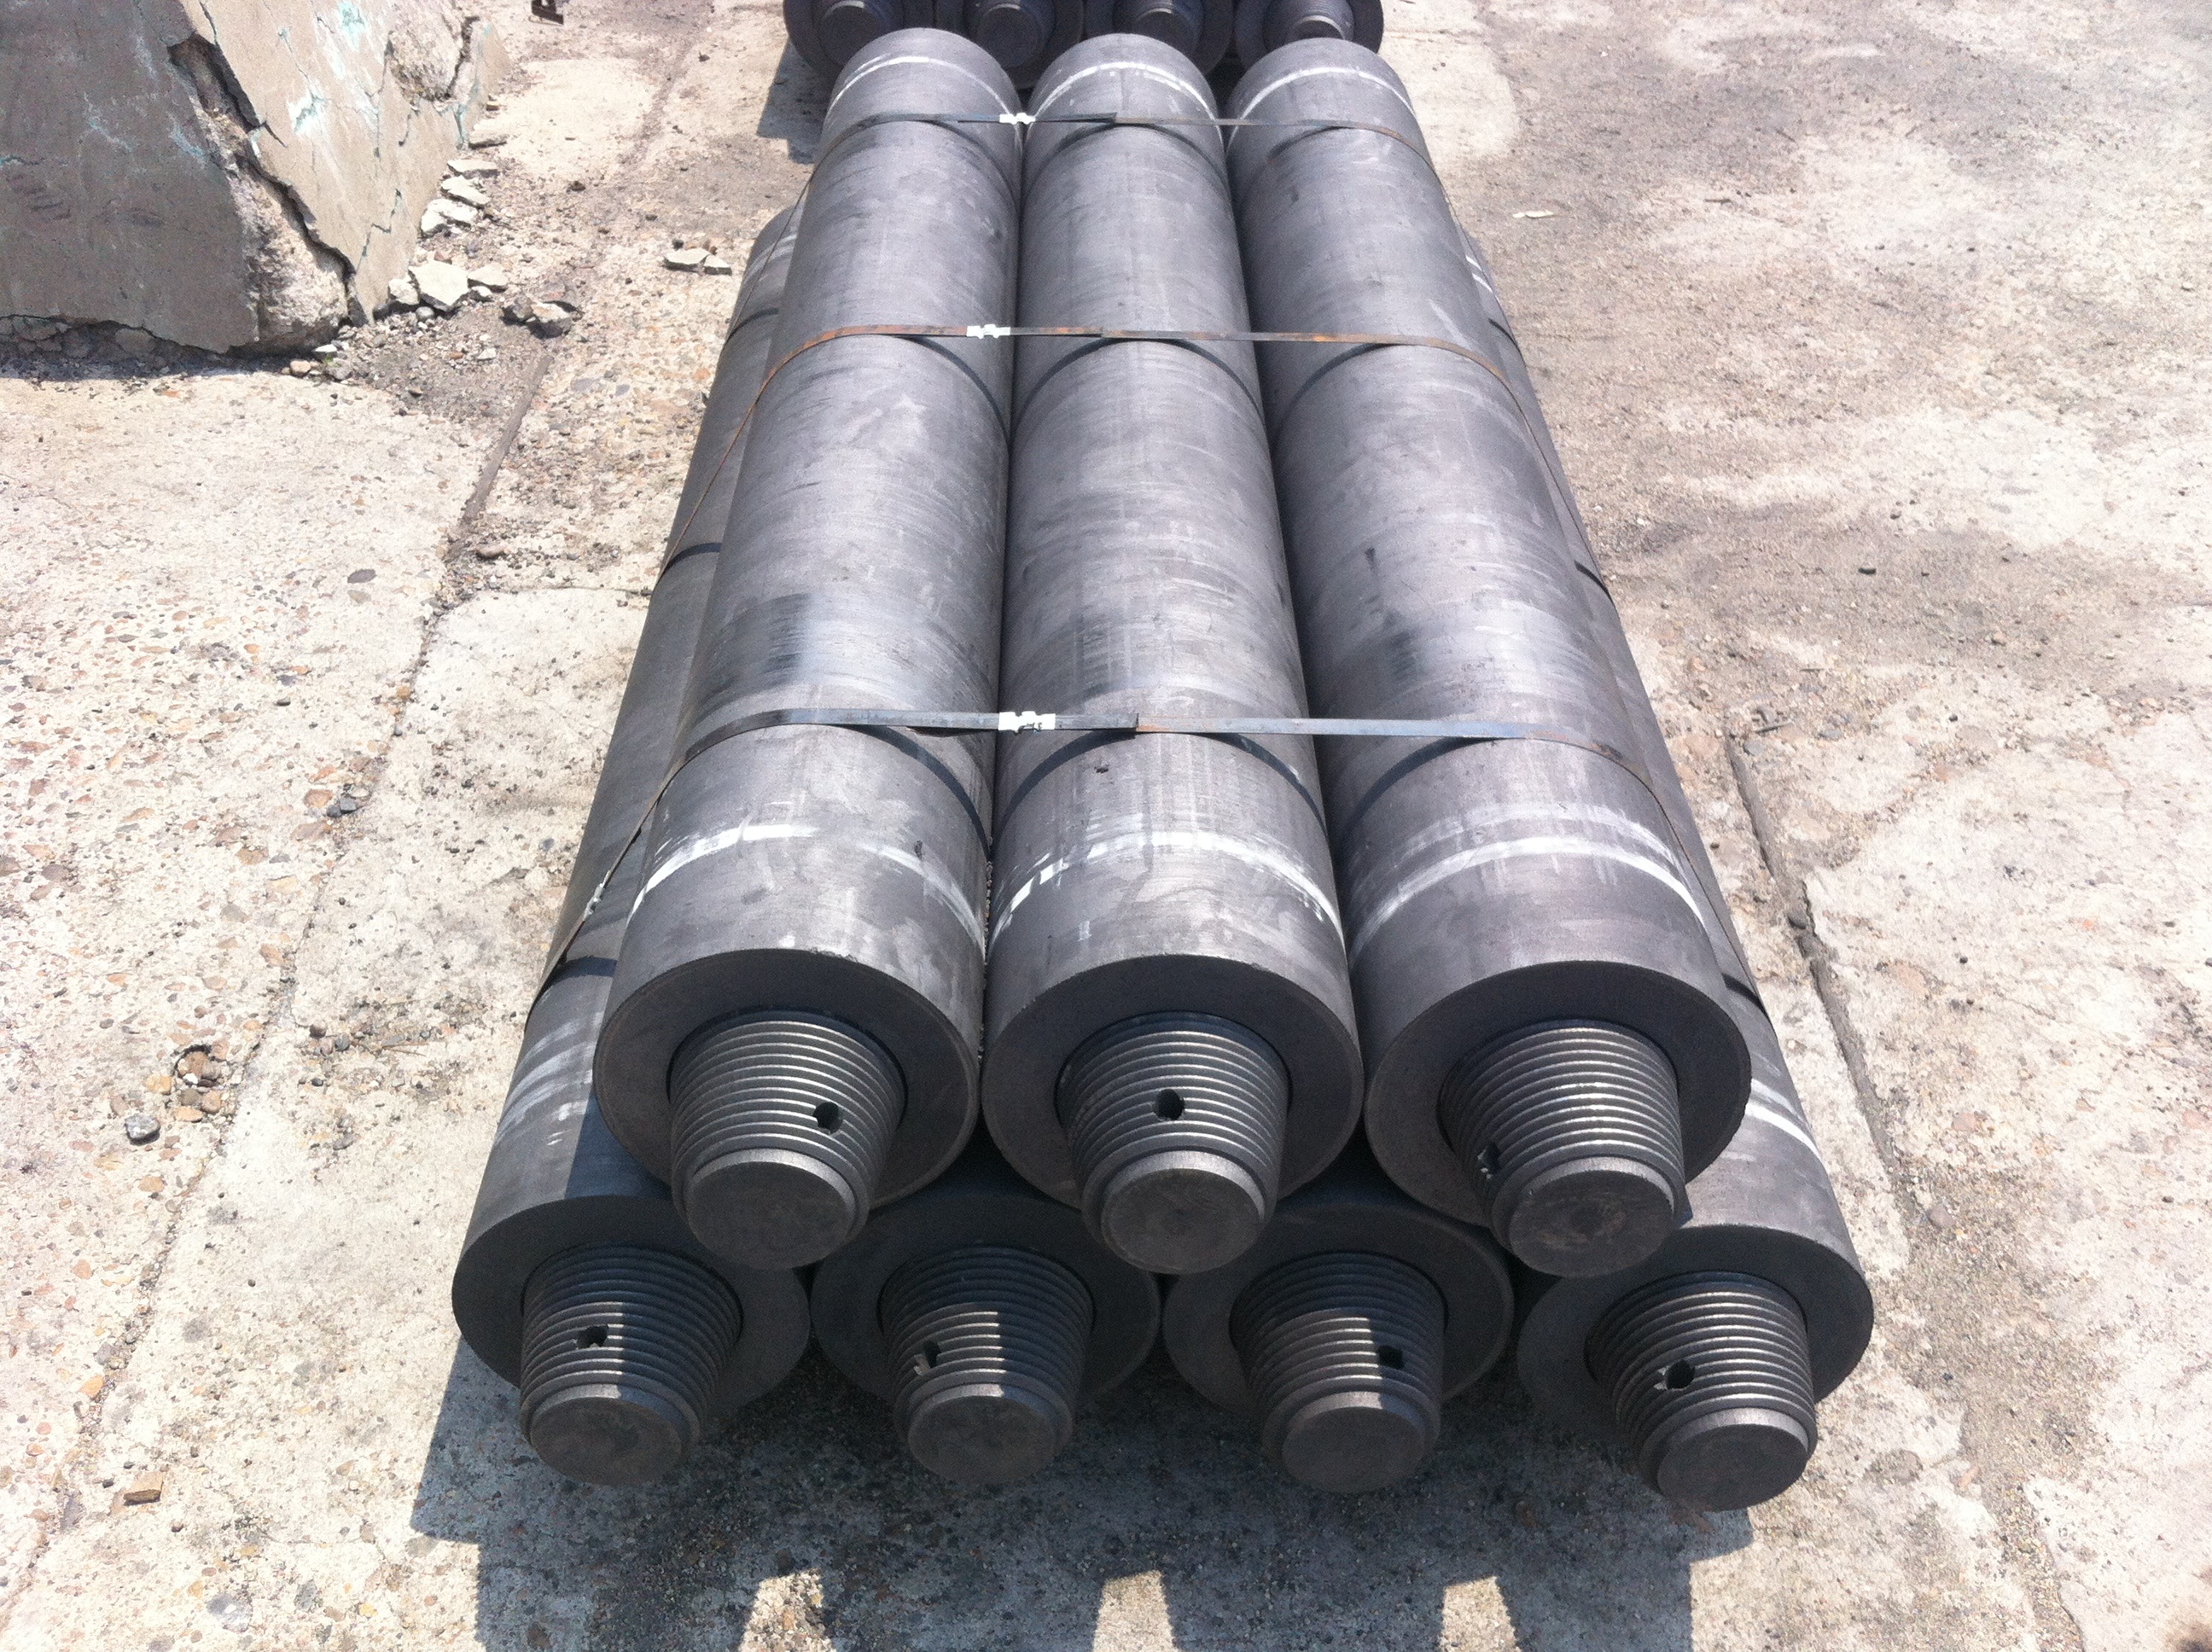 GRAPHITE ELECTRODE RP,HP.SHP.FG.UHP IN CHINA